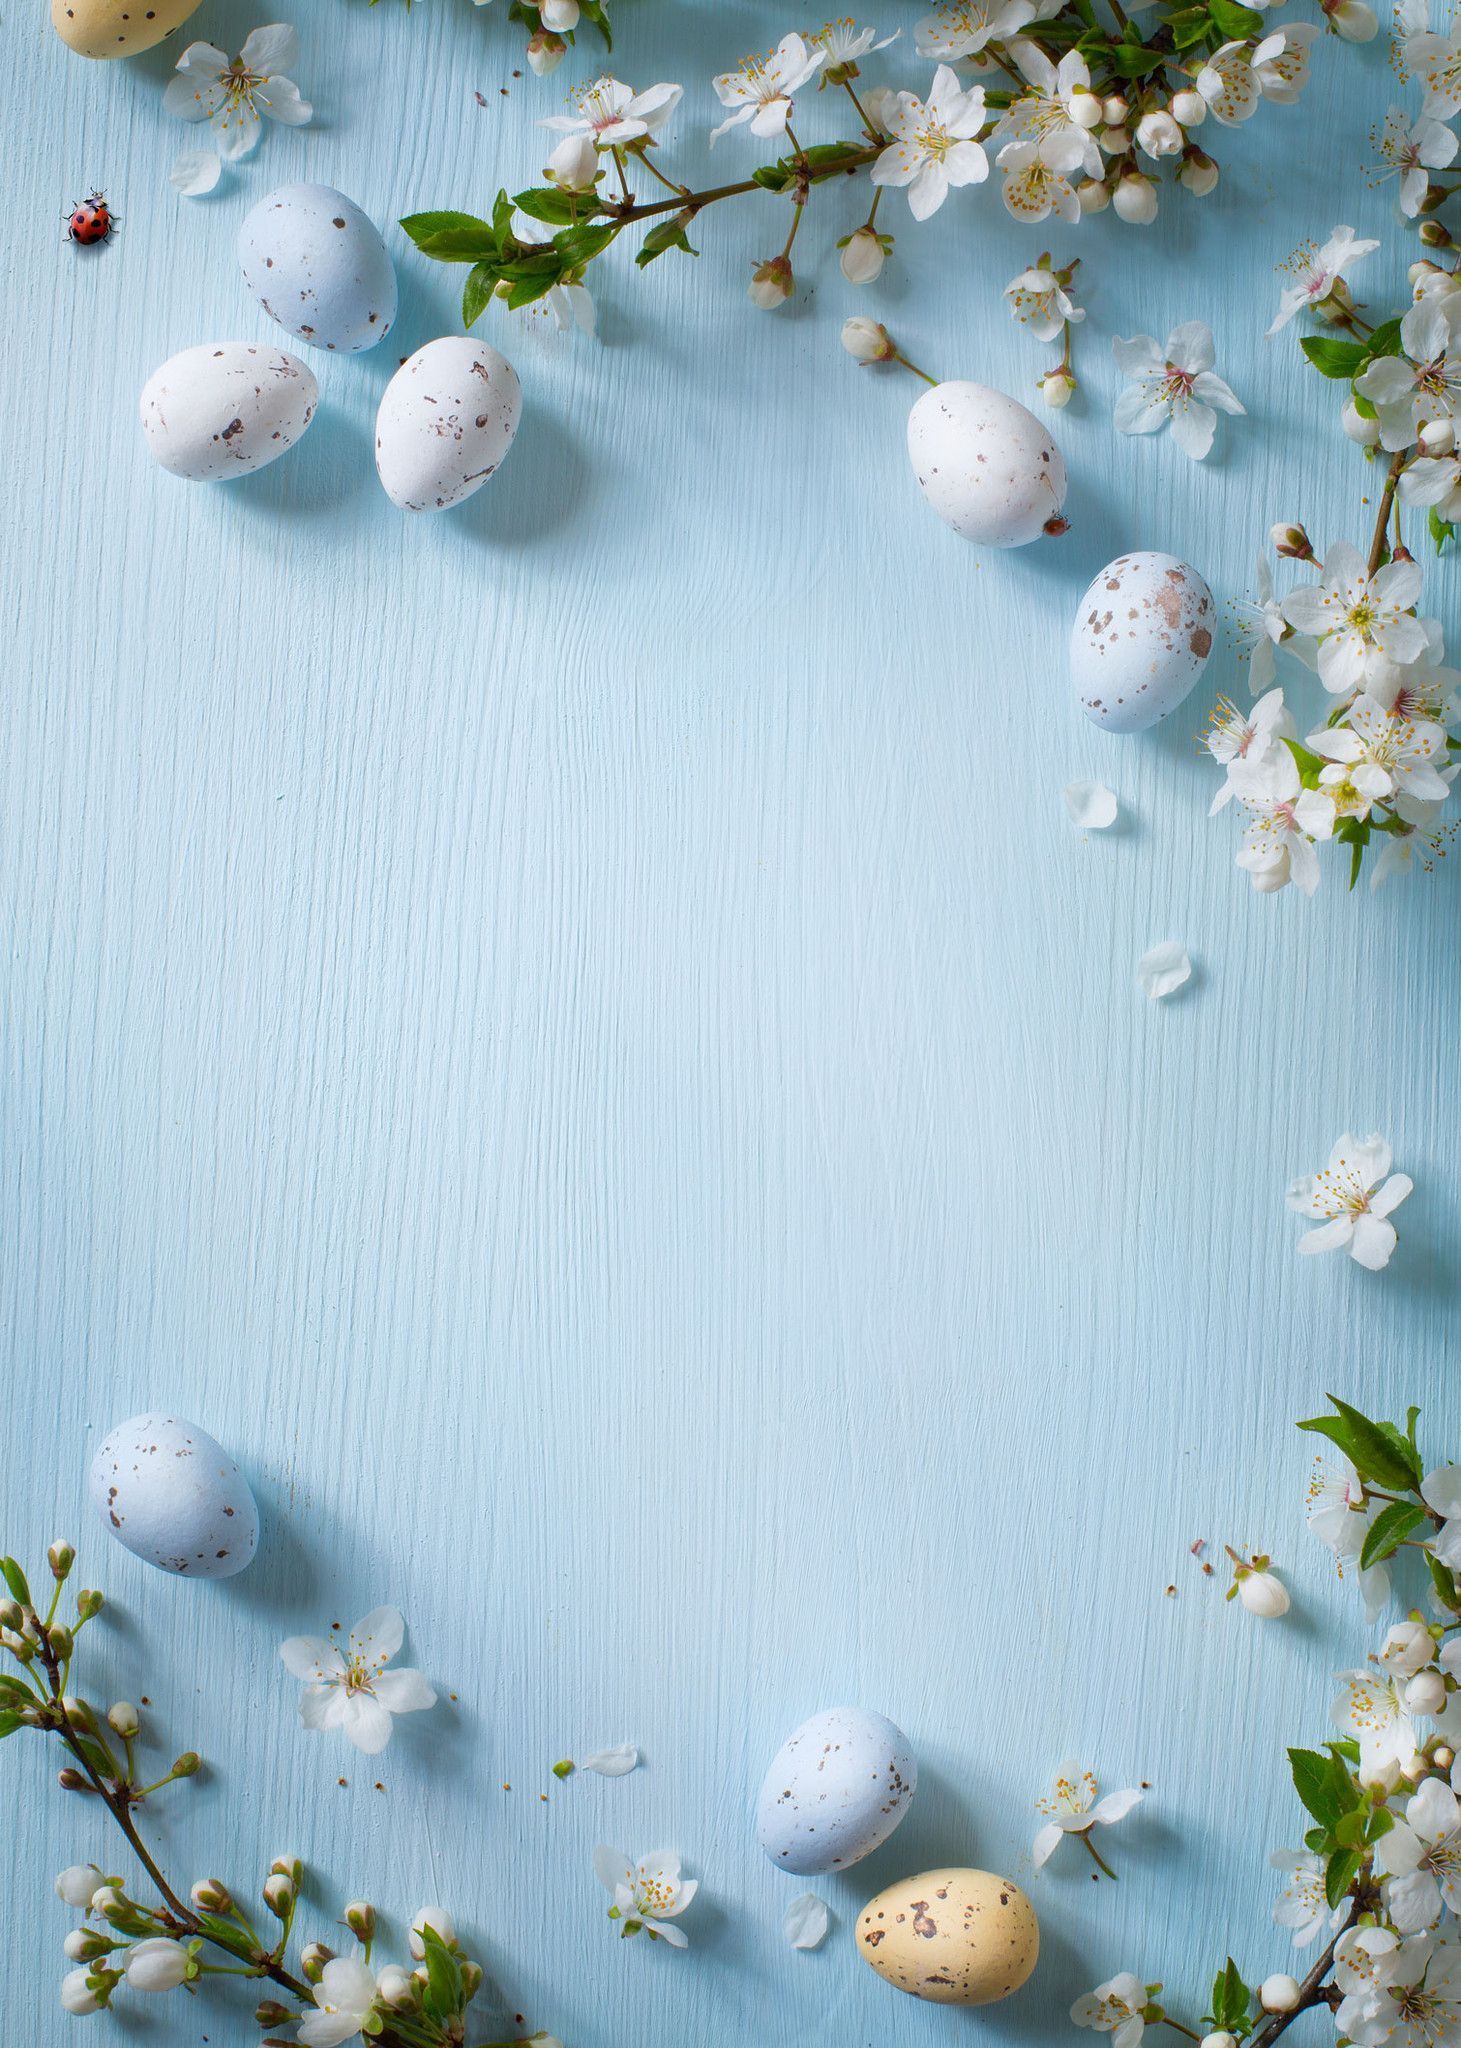 Kate Easter Blue Wall Colorful Eggs Photography Backdrops. Easter backdrops, Easter wallpaper, Easter photography